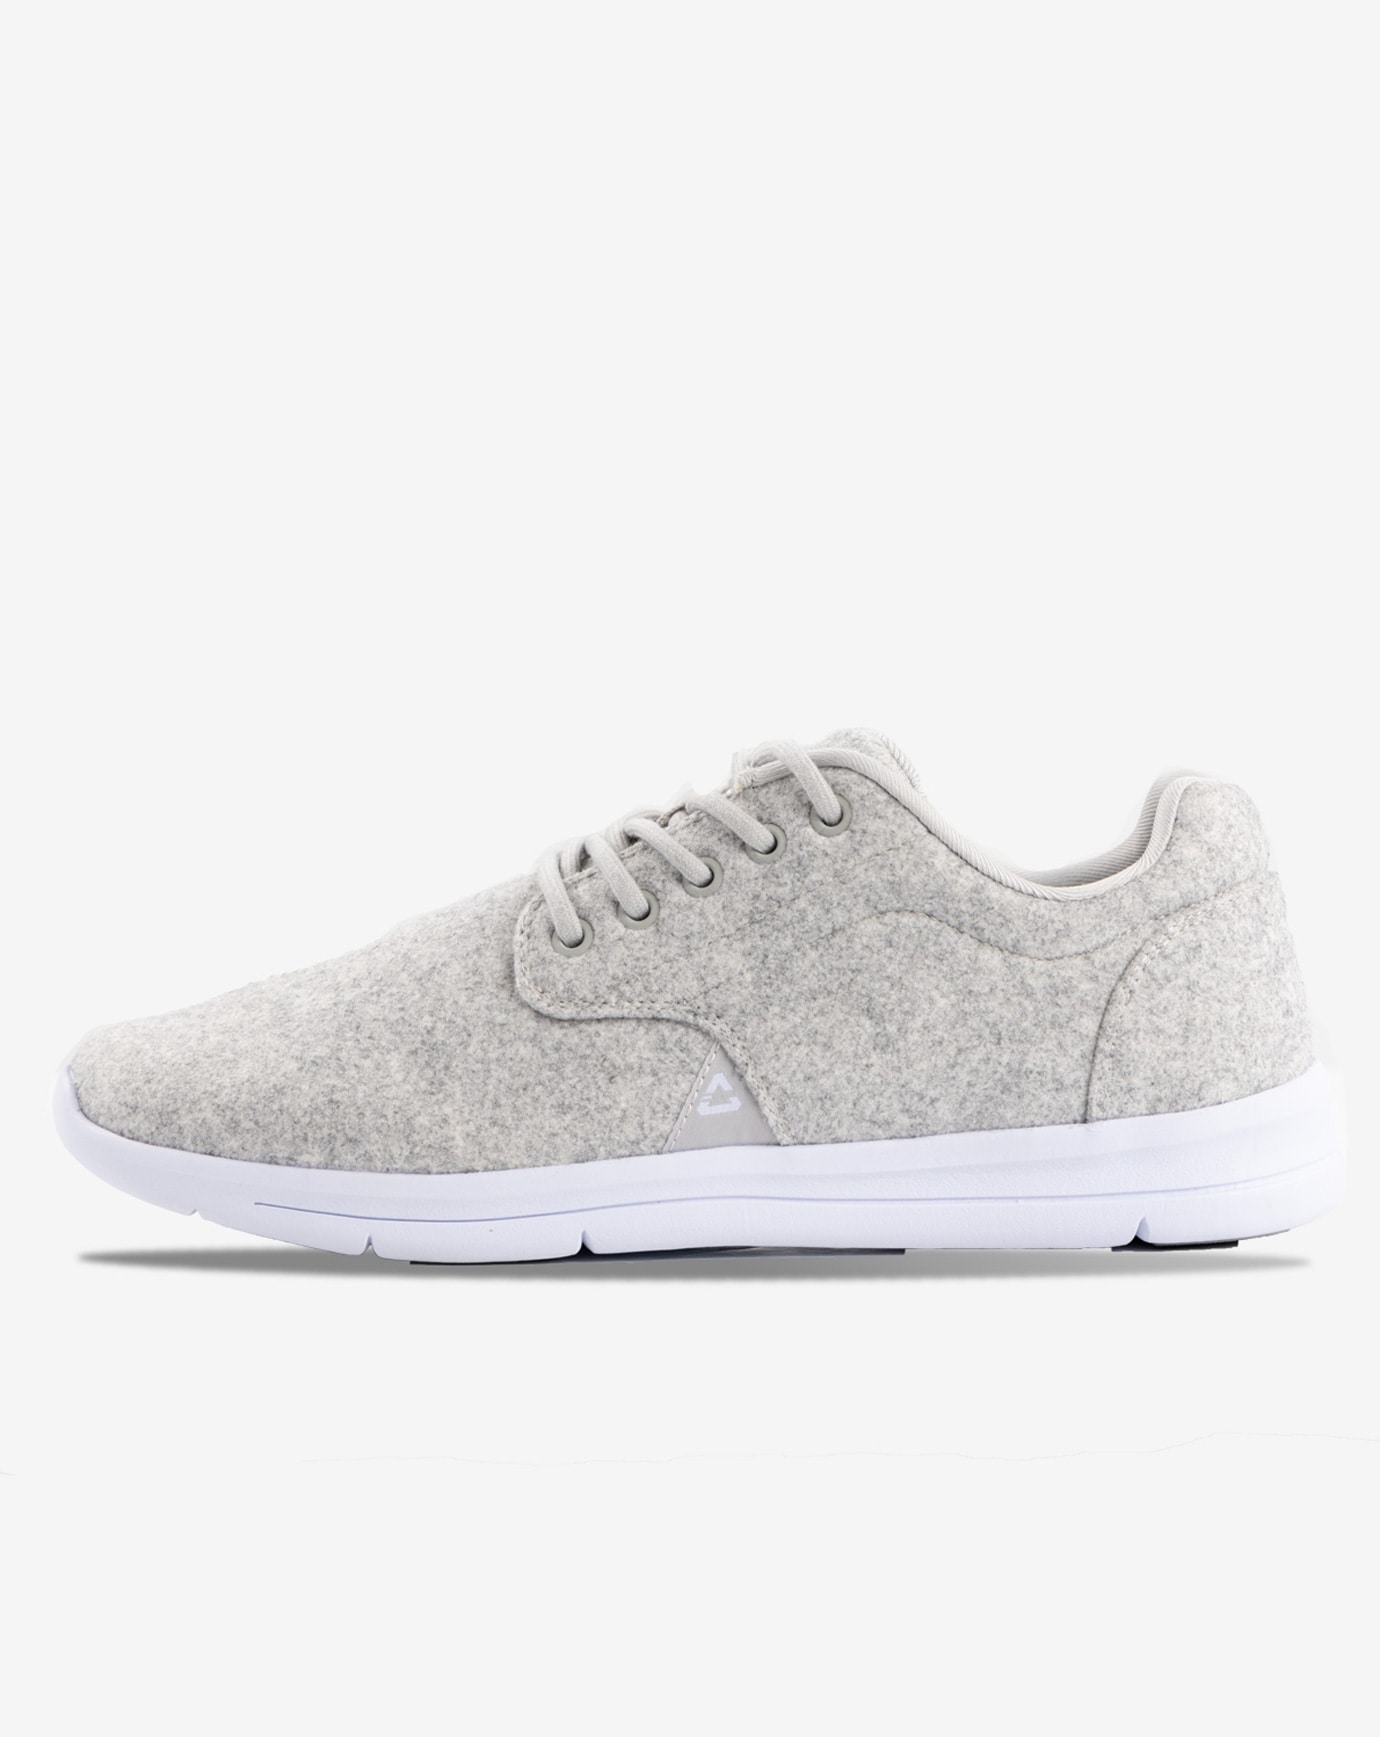 THE DAILY WOOL SHOE Image 1